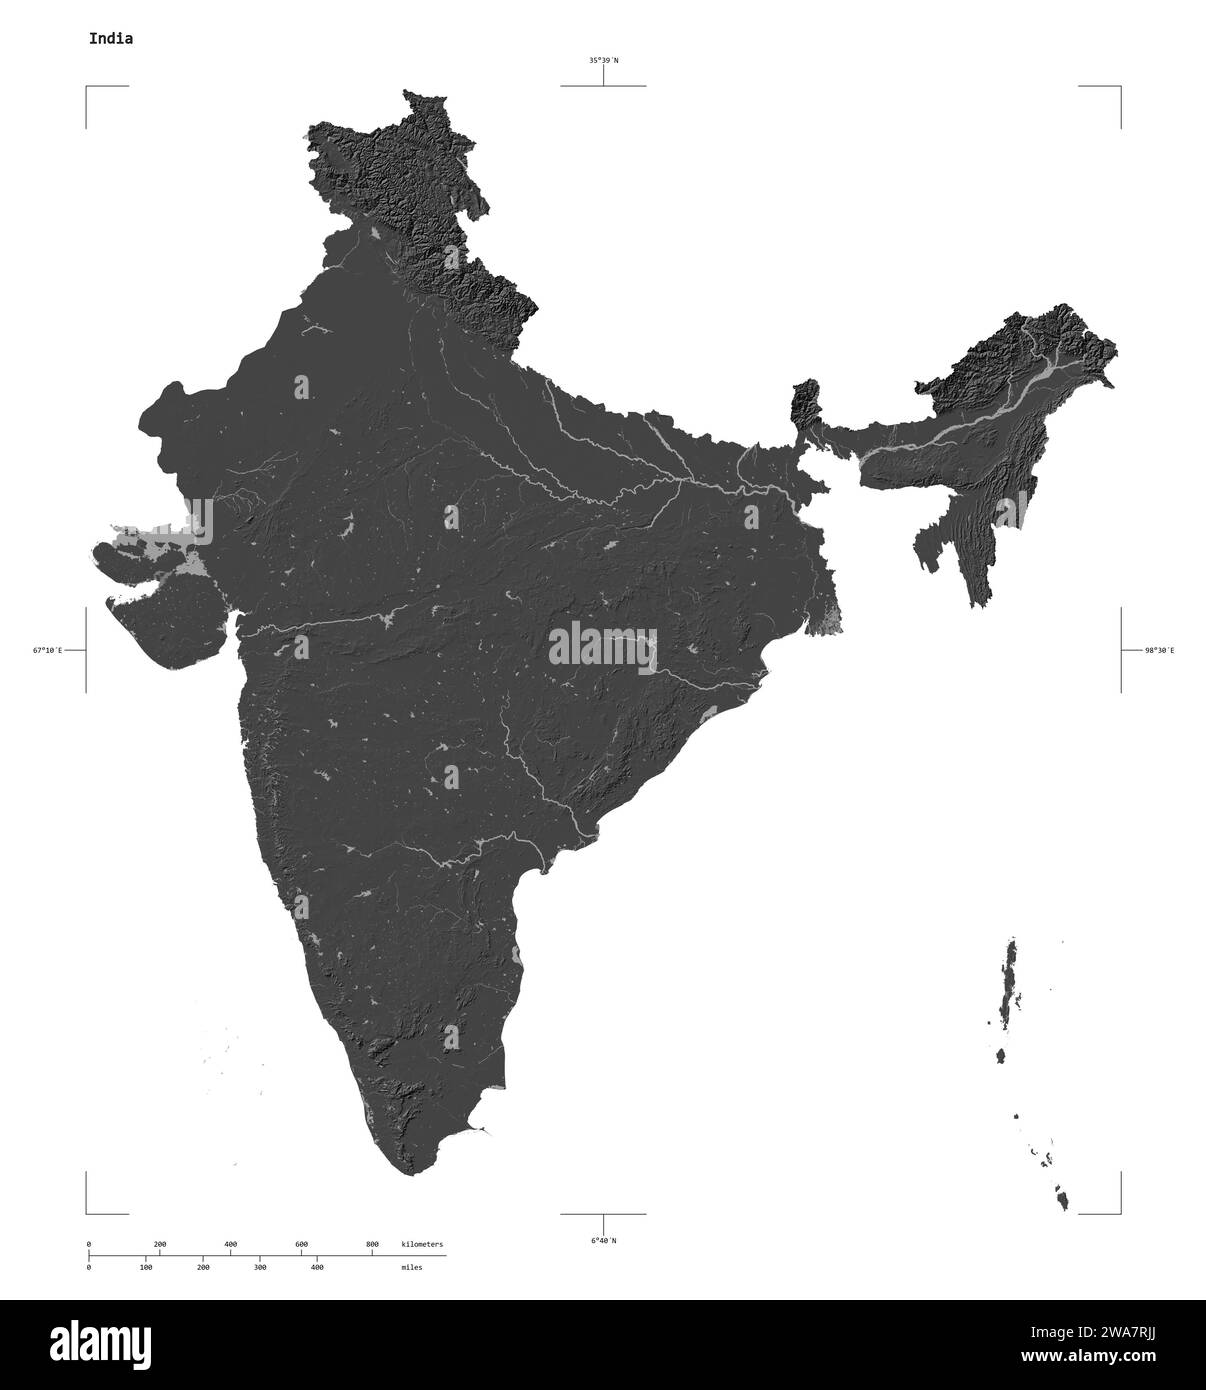 Shape of a Bilevel elevation map with lakes and rivers of the India, with distance scale and map border coordinates, isolated on white Stock Photo